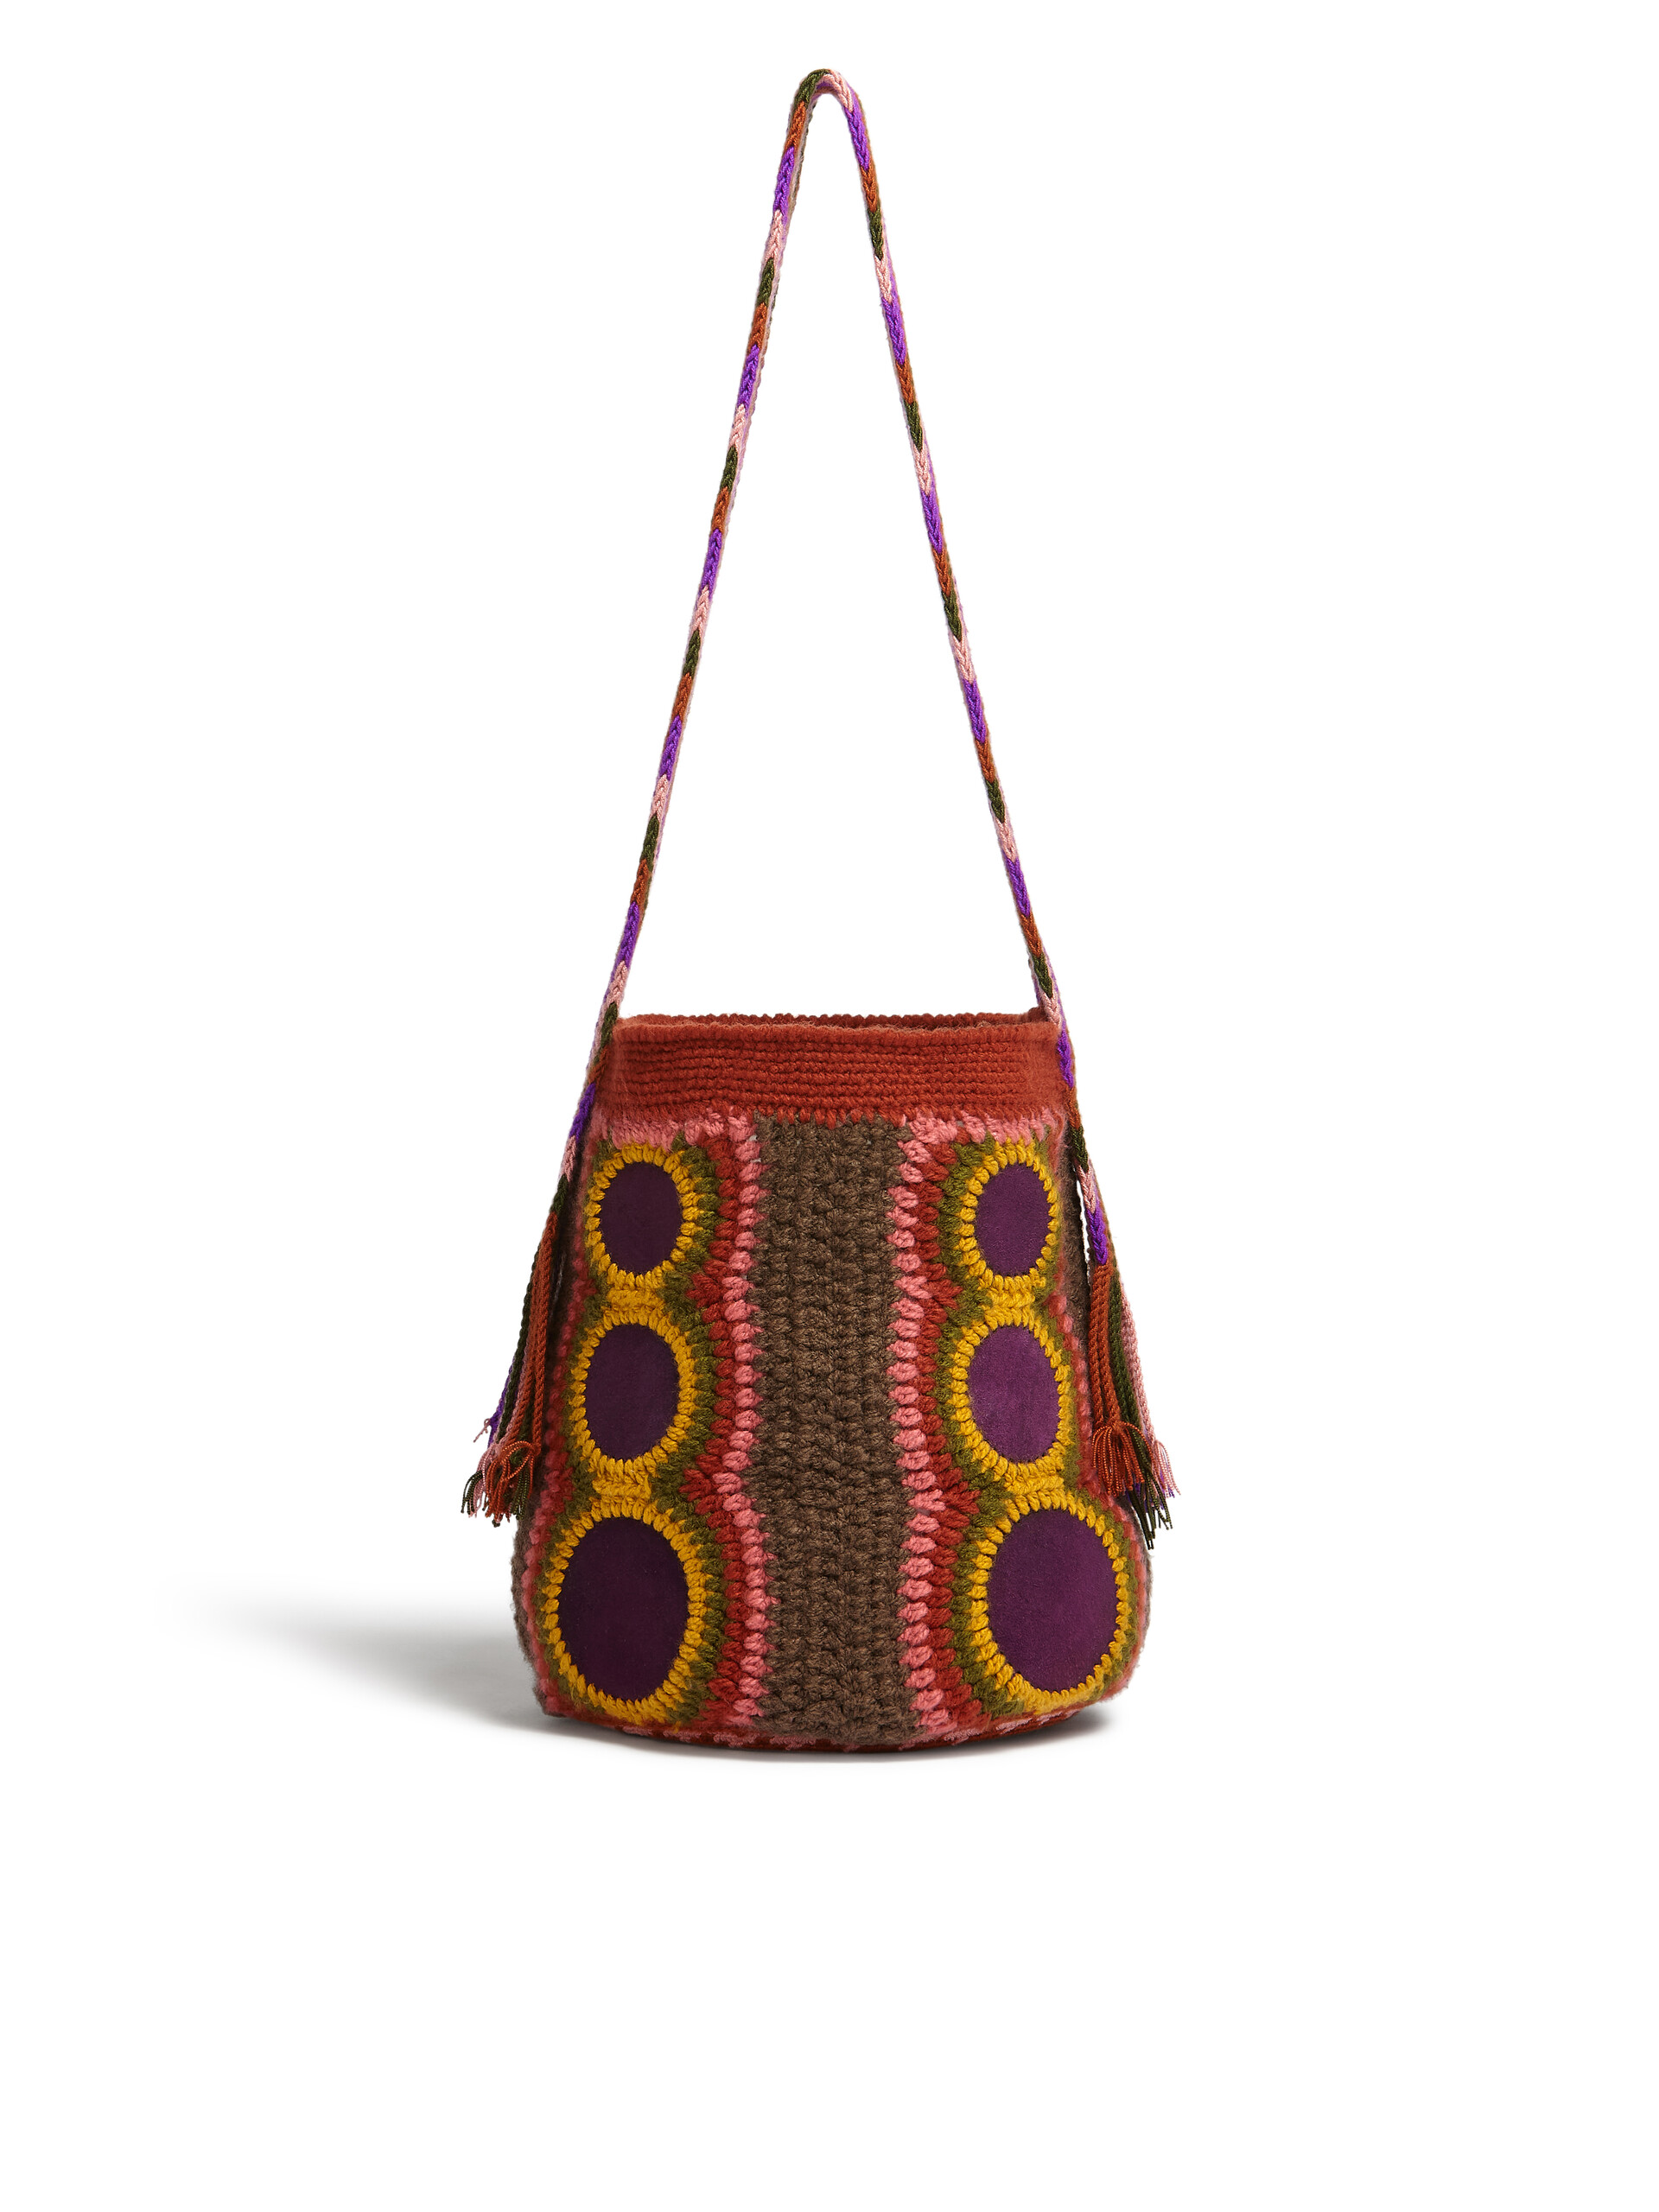 MARNI MARKET bag in brown and purple technical wool - Shopping Bags - Image 3